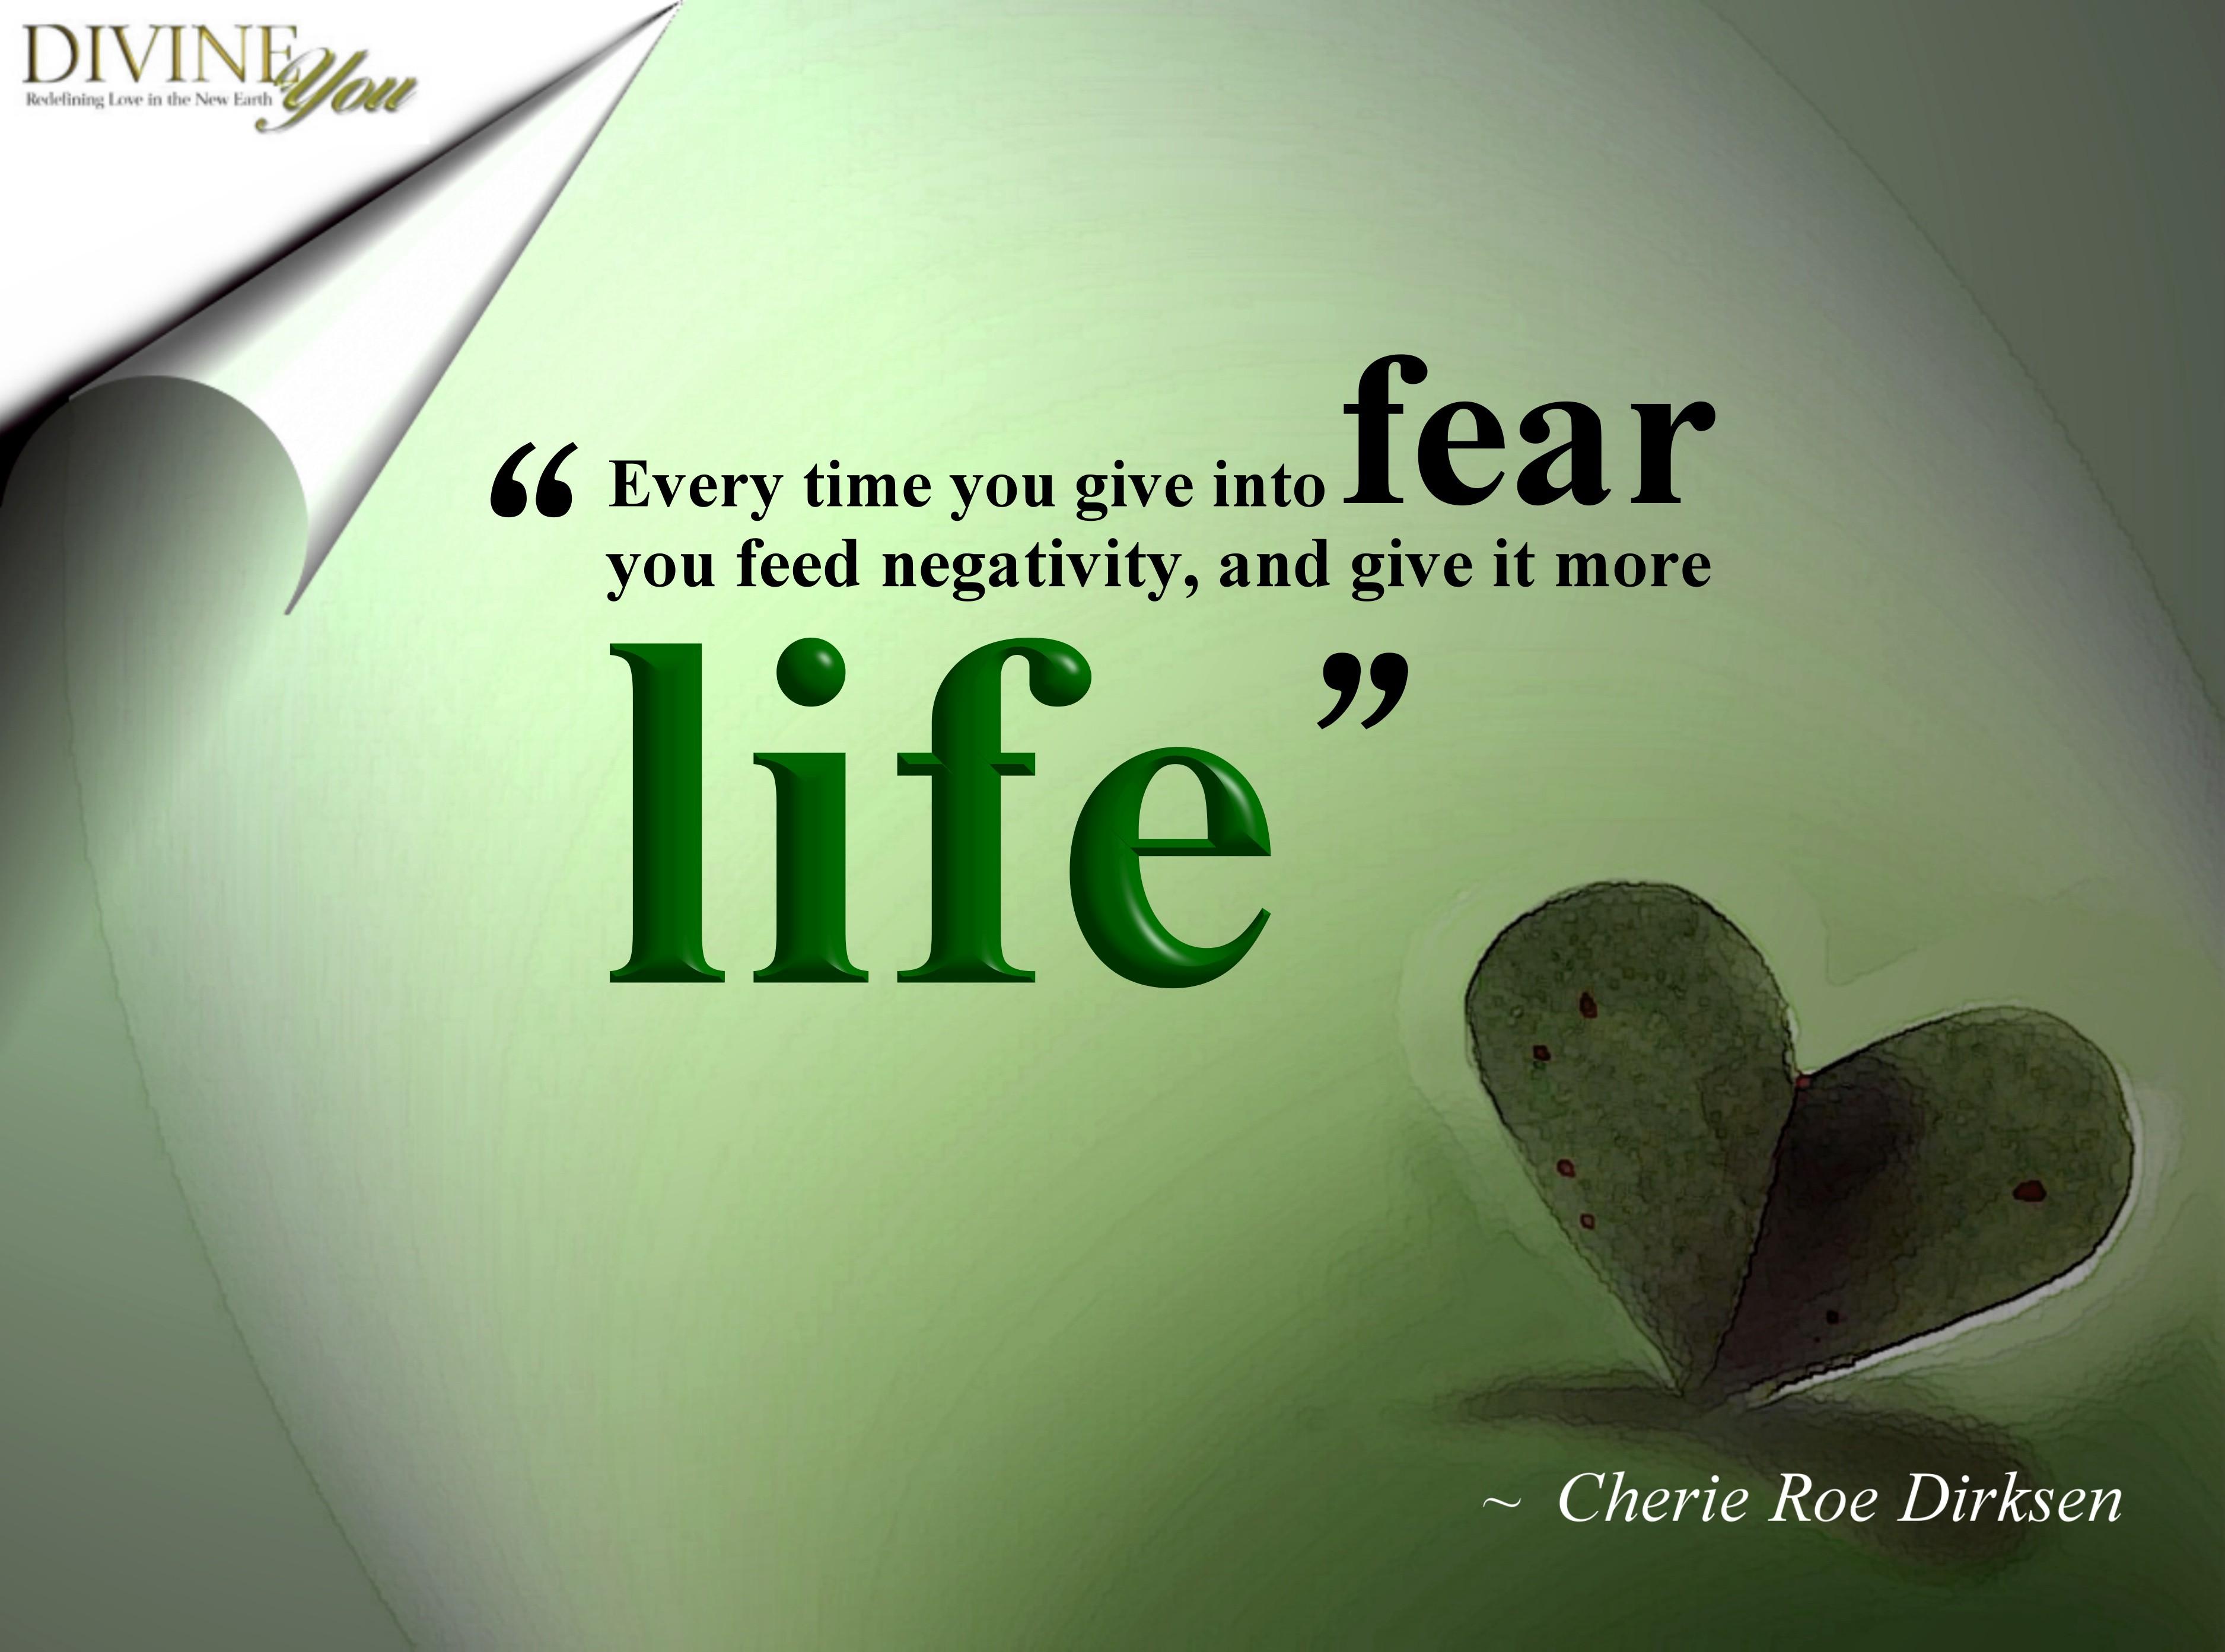 Life Quotes Of Fear HD Wallpaper For Desktop